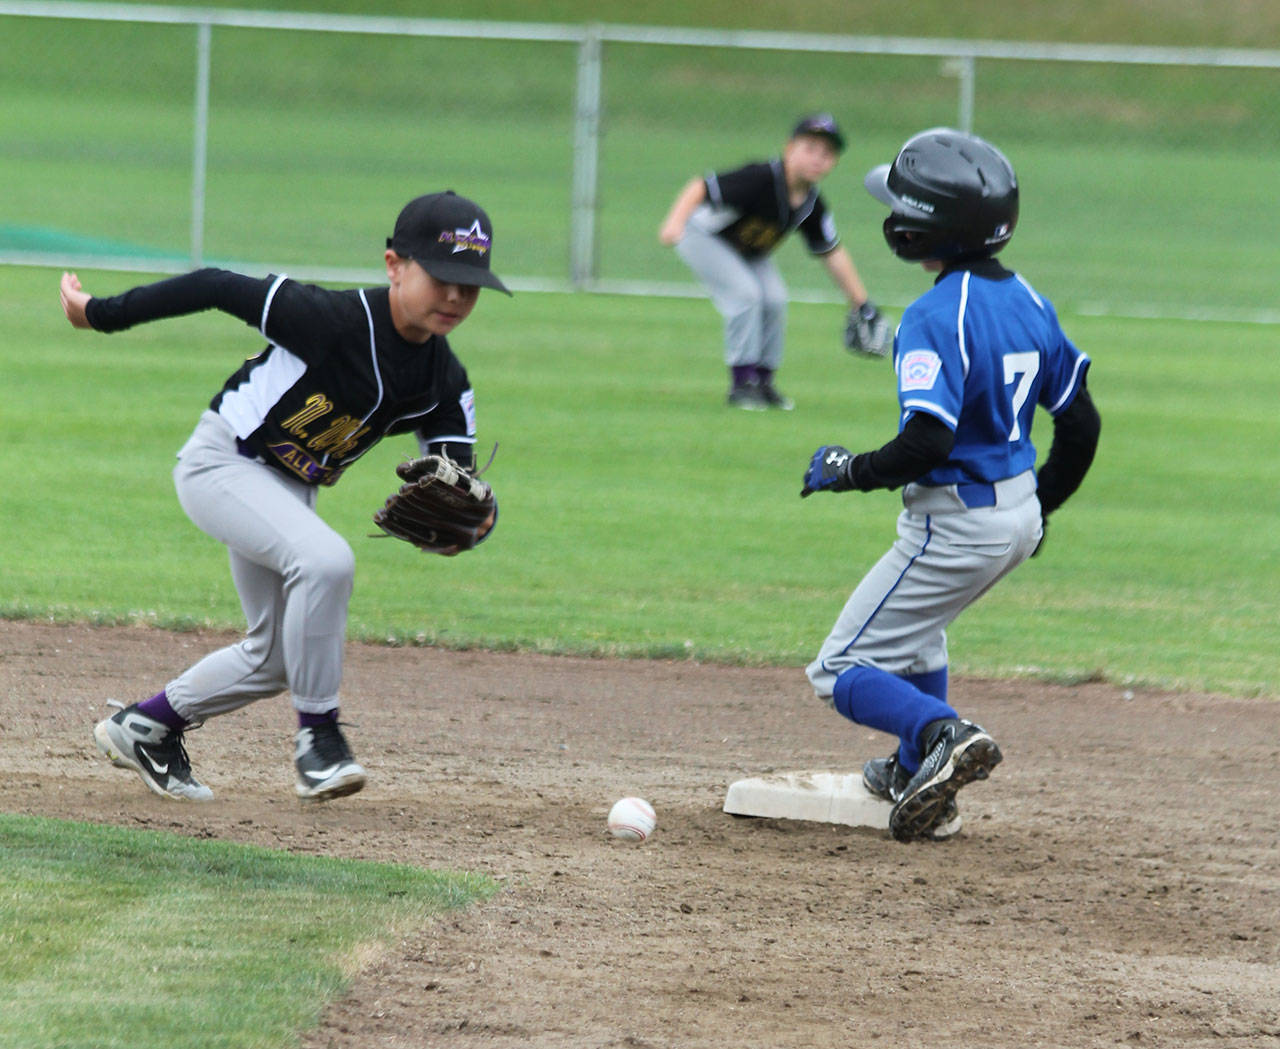 Shortstop Conner Reed runs down a loose ball for North Whidbey.(Photo by Jim Waller/Whidbey News-Times)